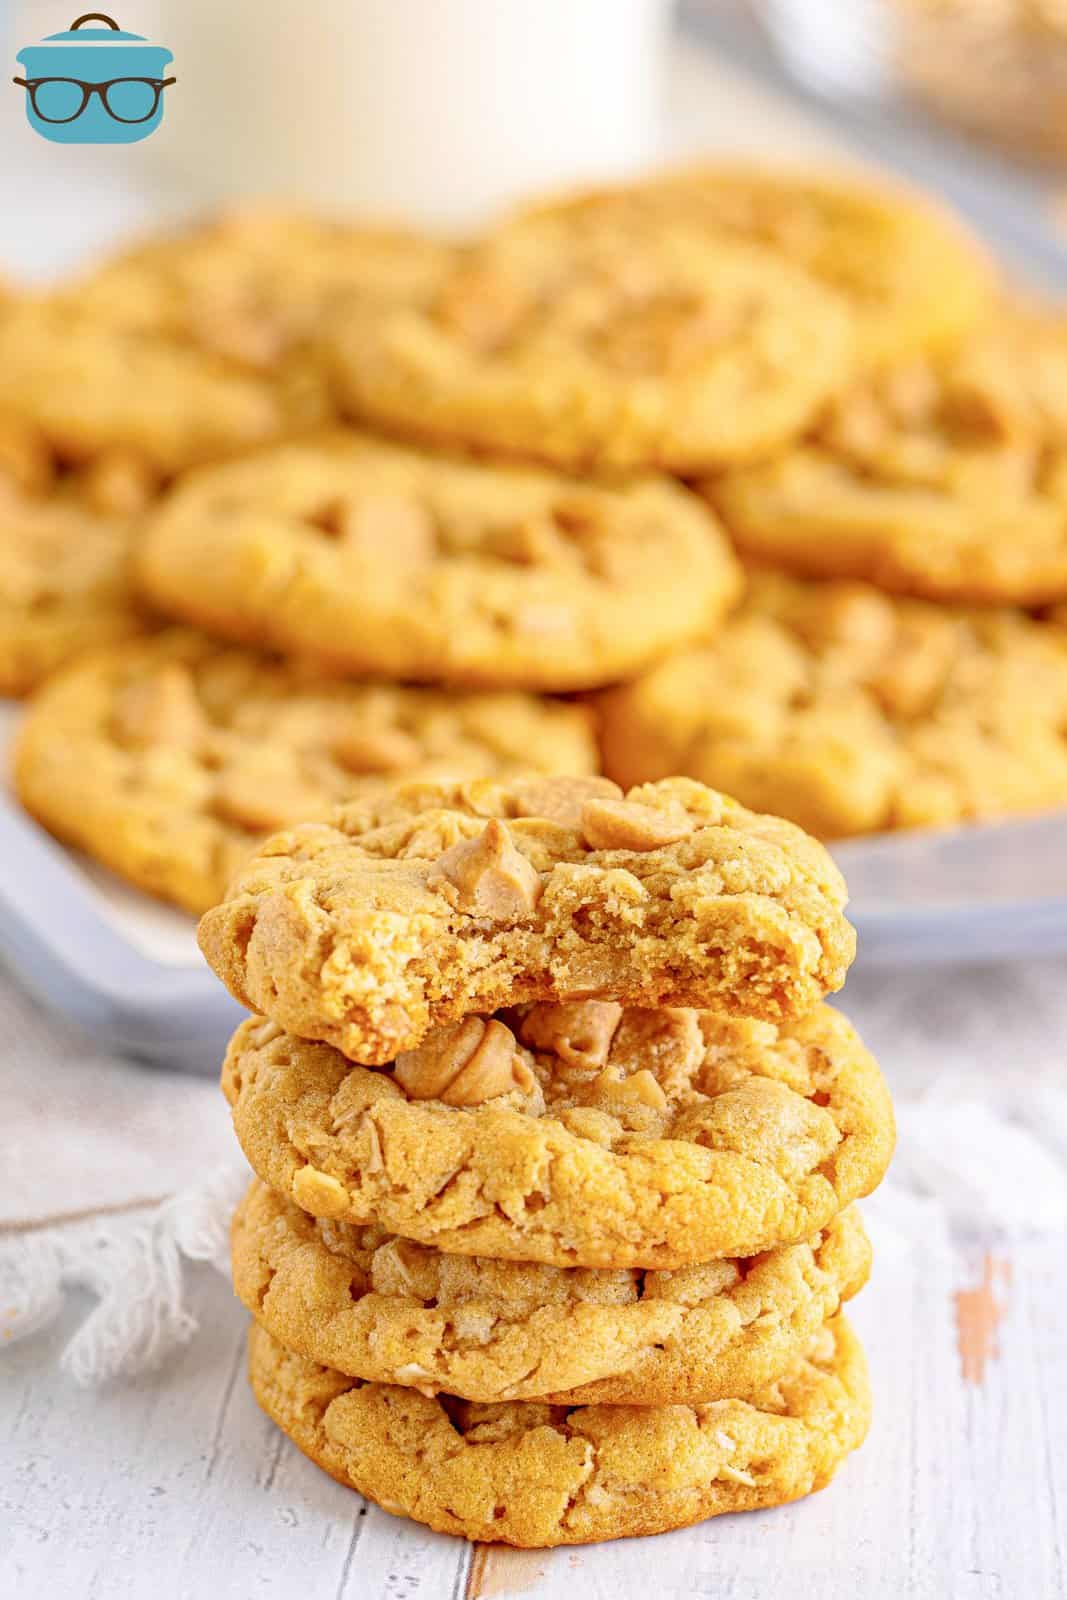 Four stacked Peanut Butter Oatmeal Cookies with bite taken out of top one.